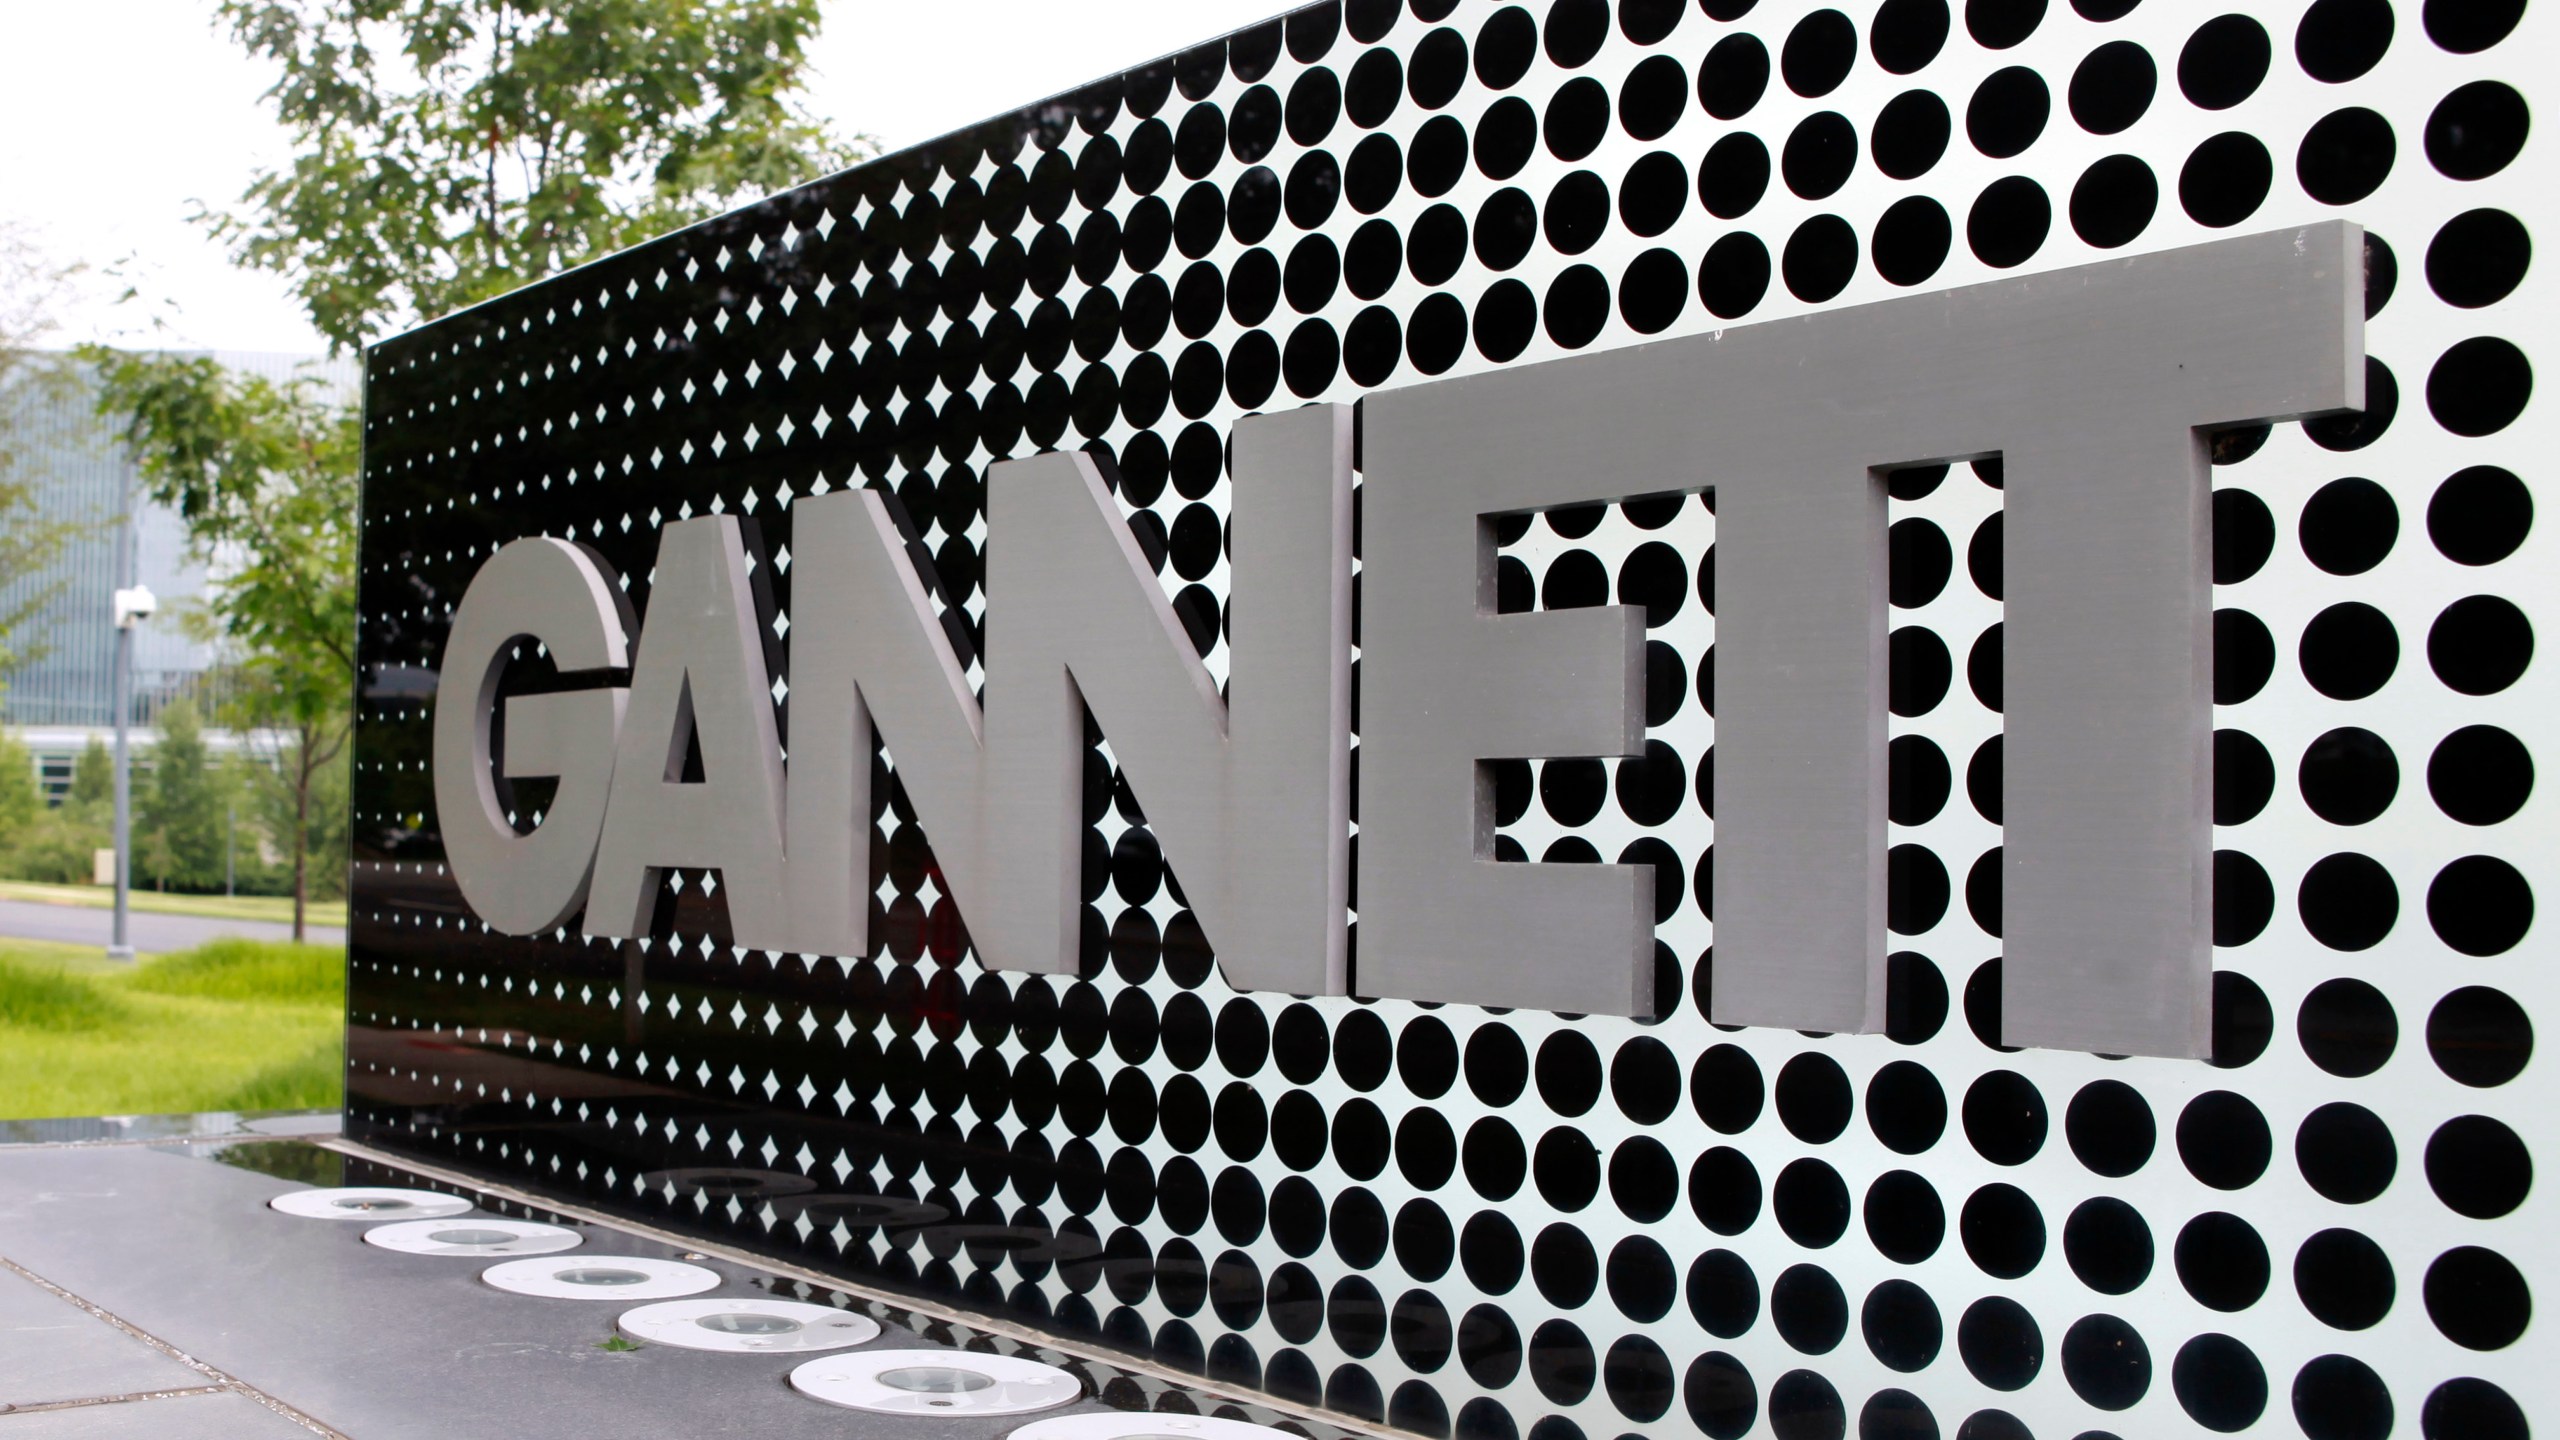 FILE - The Gannett Co. headquarters sign is seen, July 14, 2010, in McLean, Va. The media company Gannett, publishers of USA Today and owner of the nation's largest newspaper chain, said Tuesday, March 19, 2024, that it would stop using journalism from The Associated Press later this month, severing a century-old partnership. (AP Photo/Jacquelyn Martin, File)